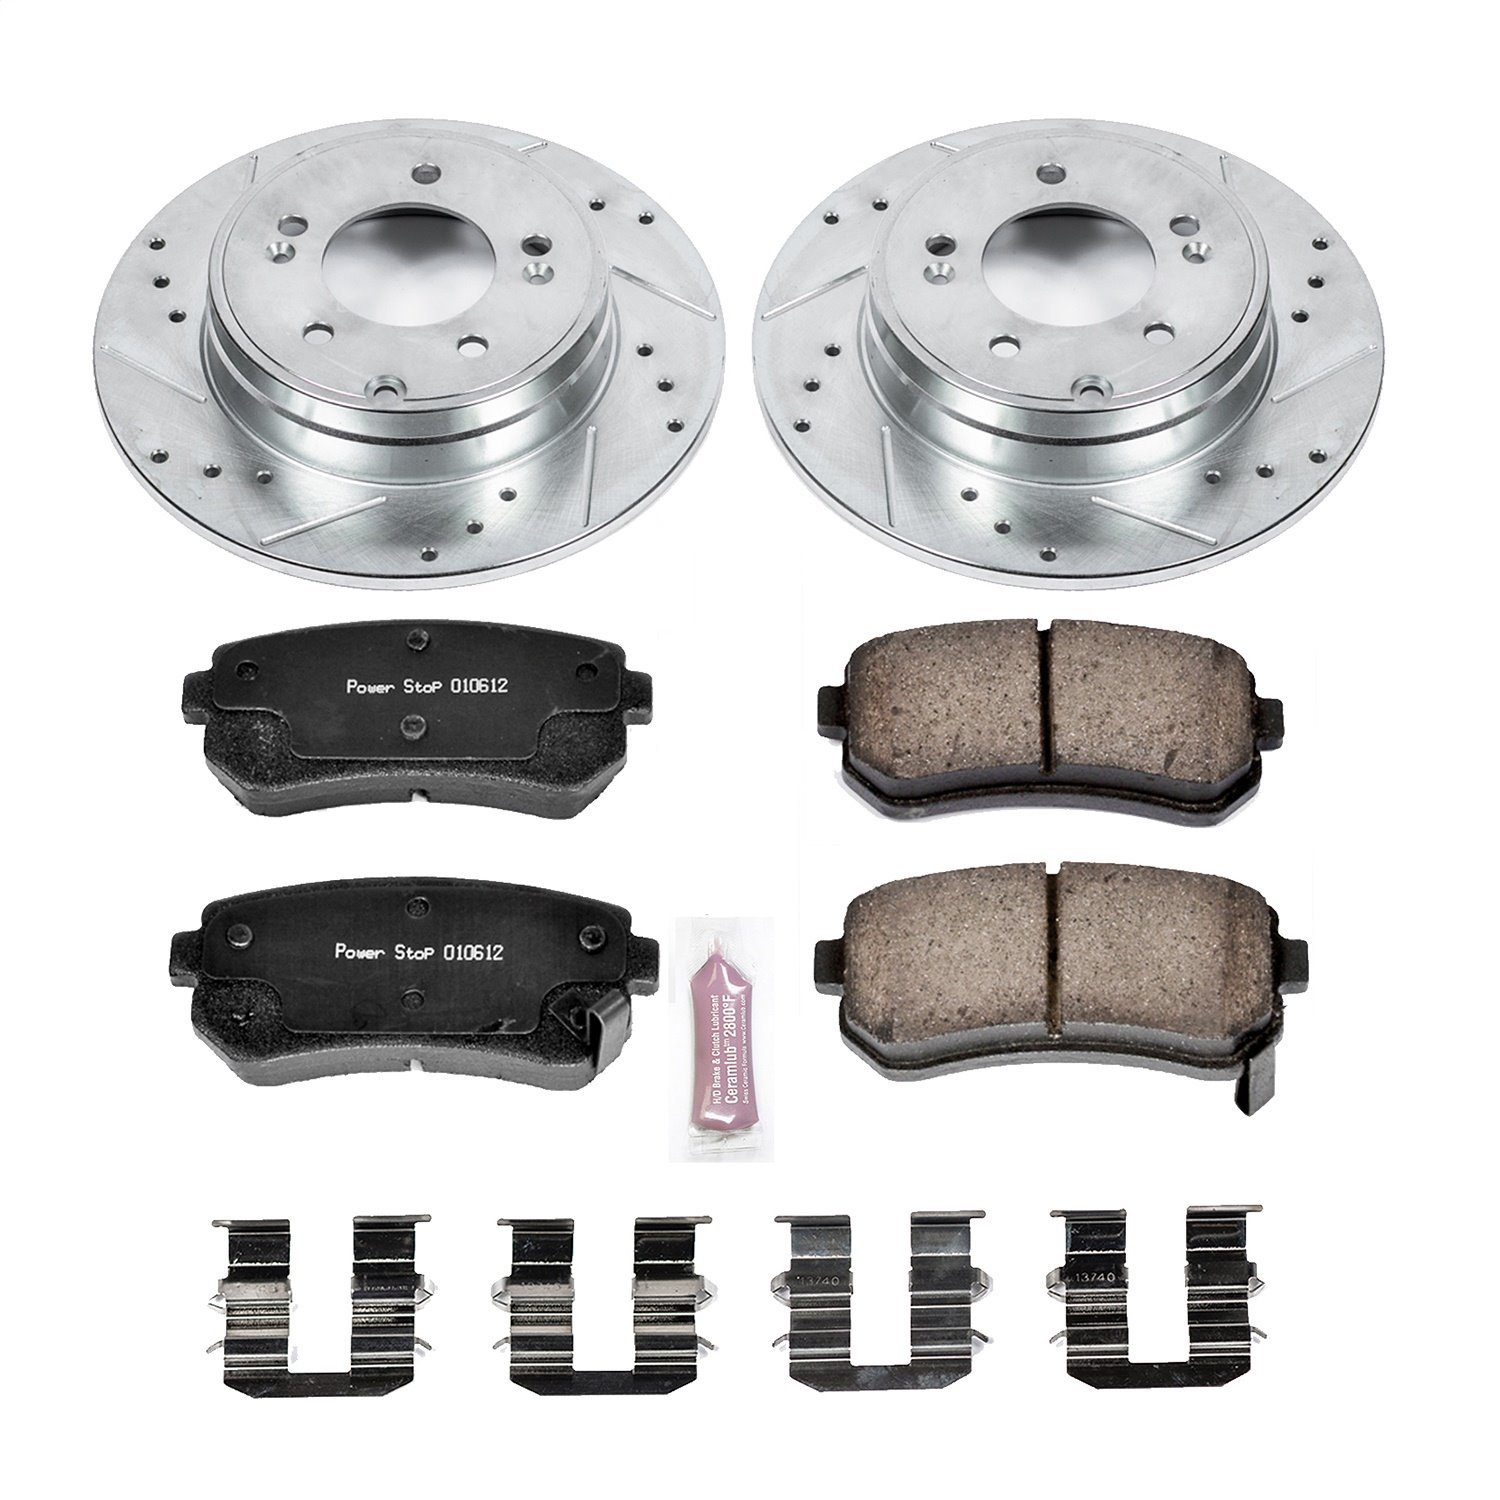 Z23 Rear Brake Pads and Rotors Kit for